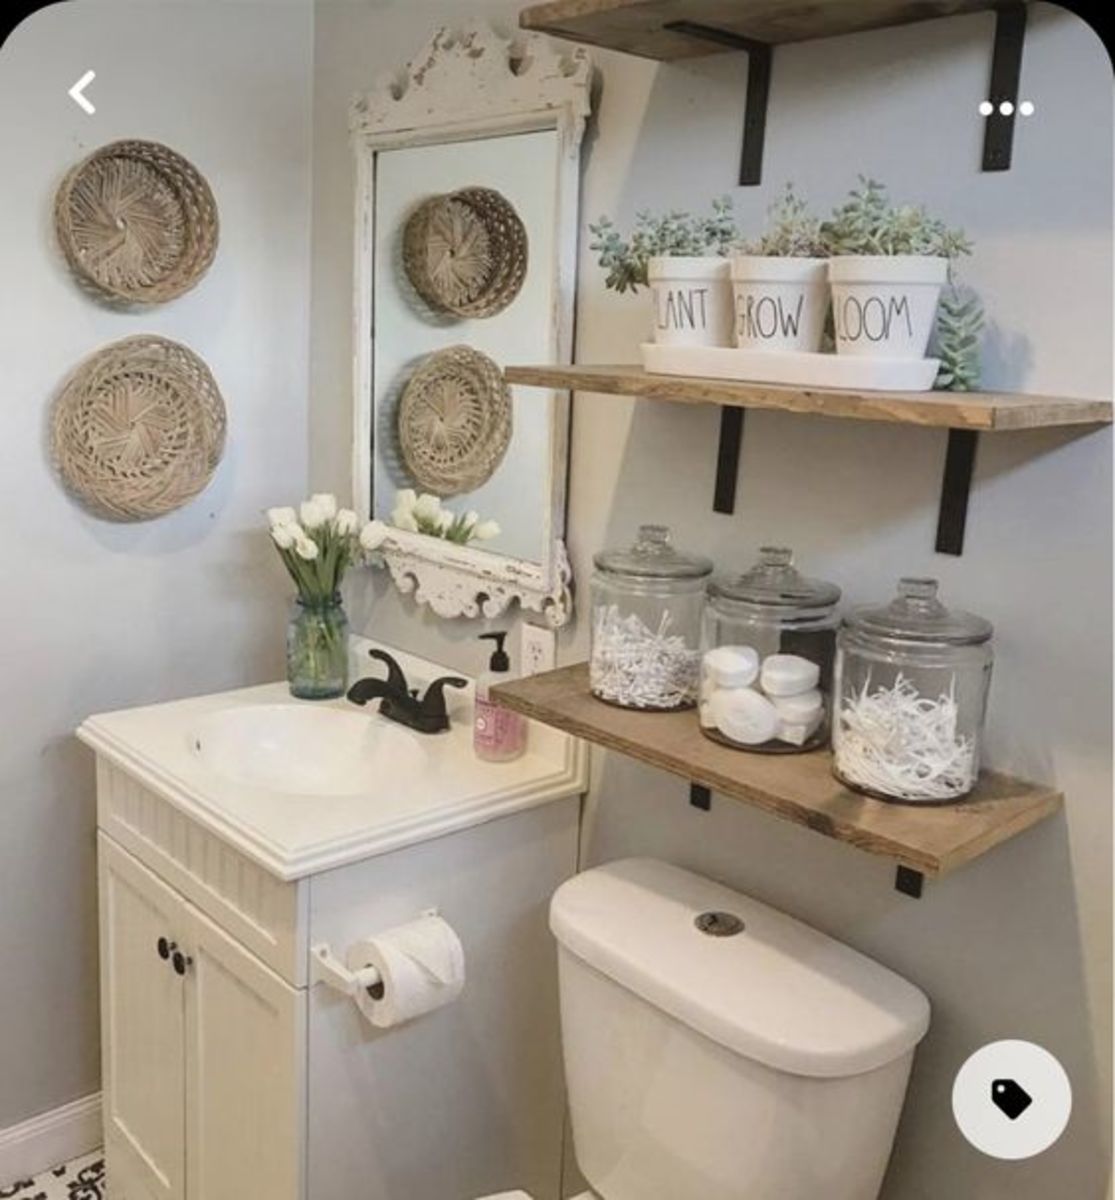 Genius Bathroom Organization Ideas to Keep You Clutter Free - HubPages